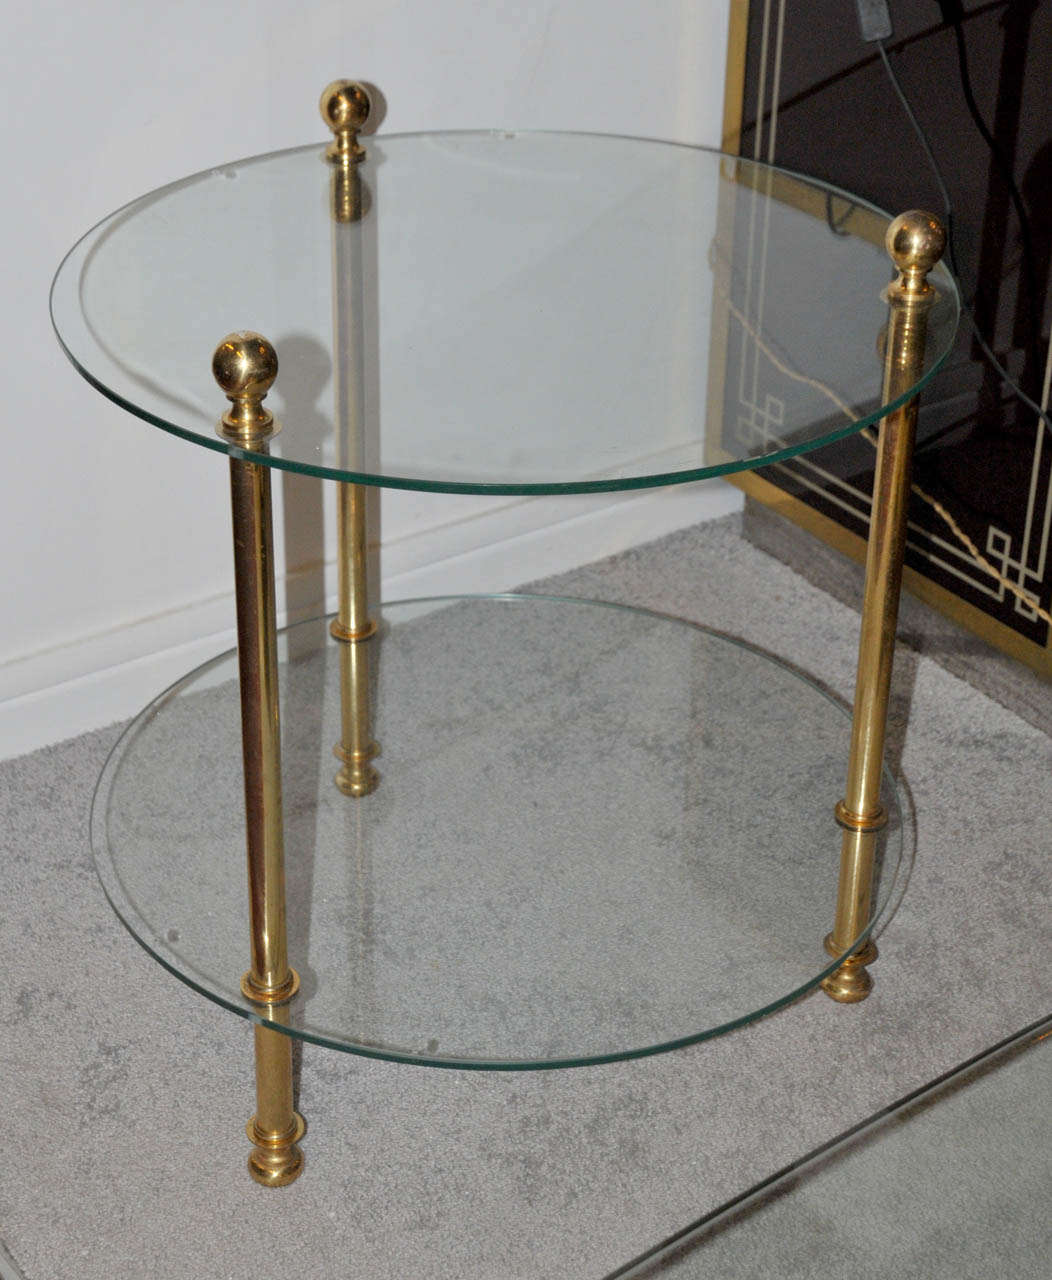 1960's pair of gueridons. Gilded brass legs and glass tops. Legs top sphere ends in bronze. Very good condition. Normal wear consistent with age and use.